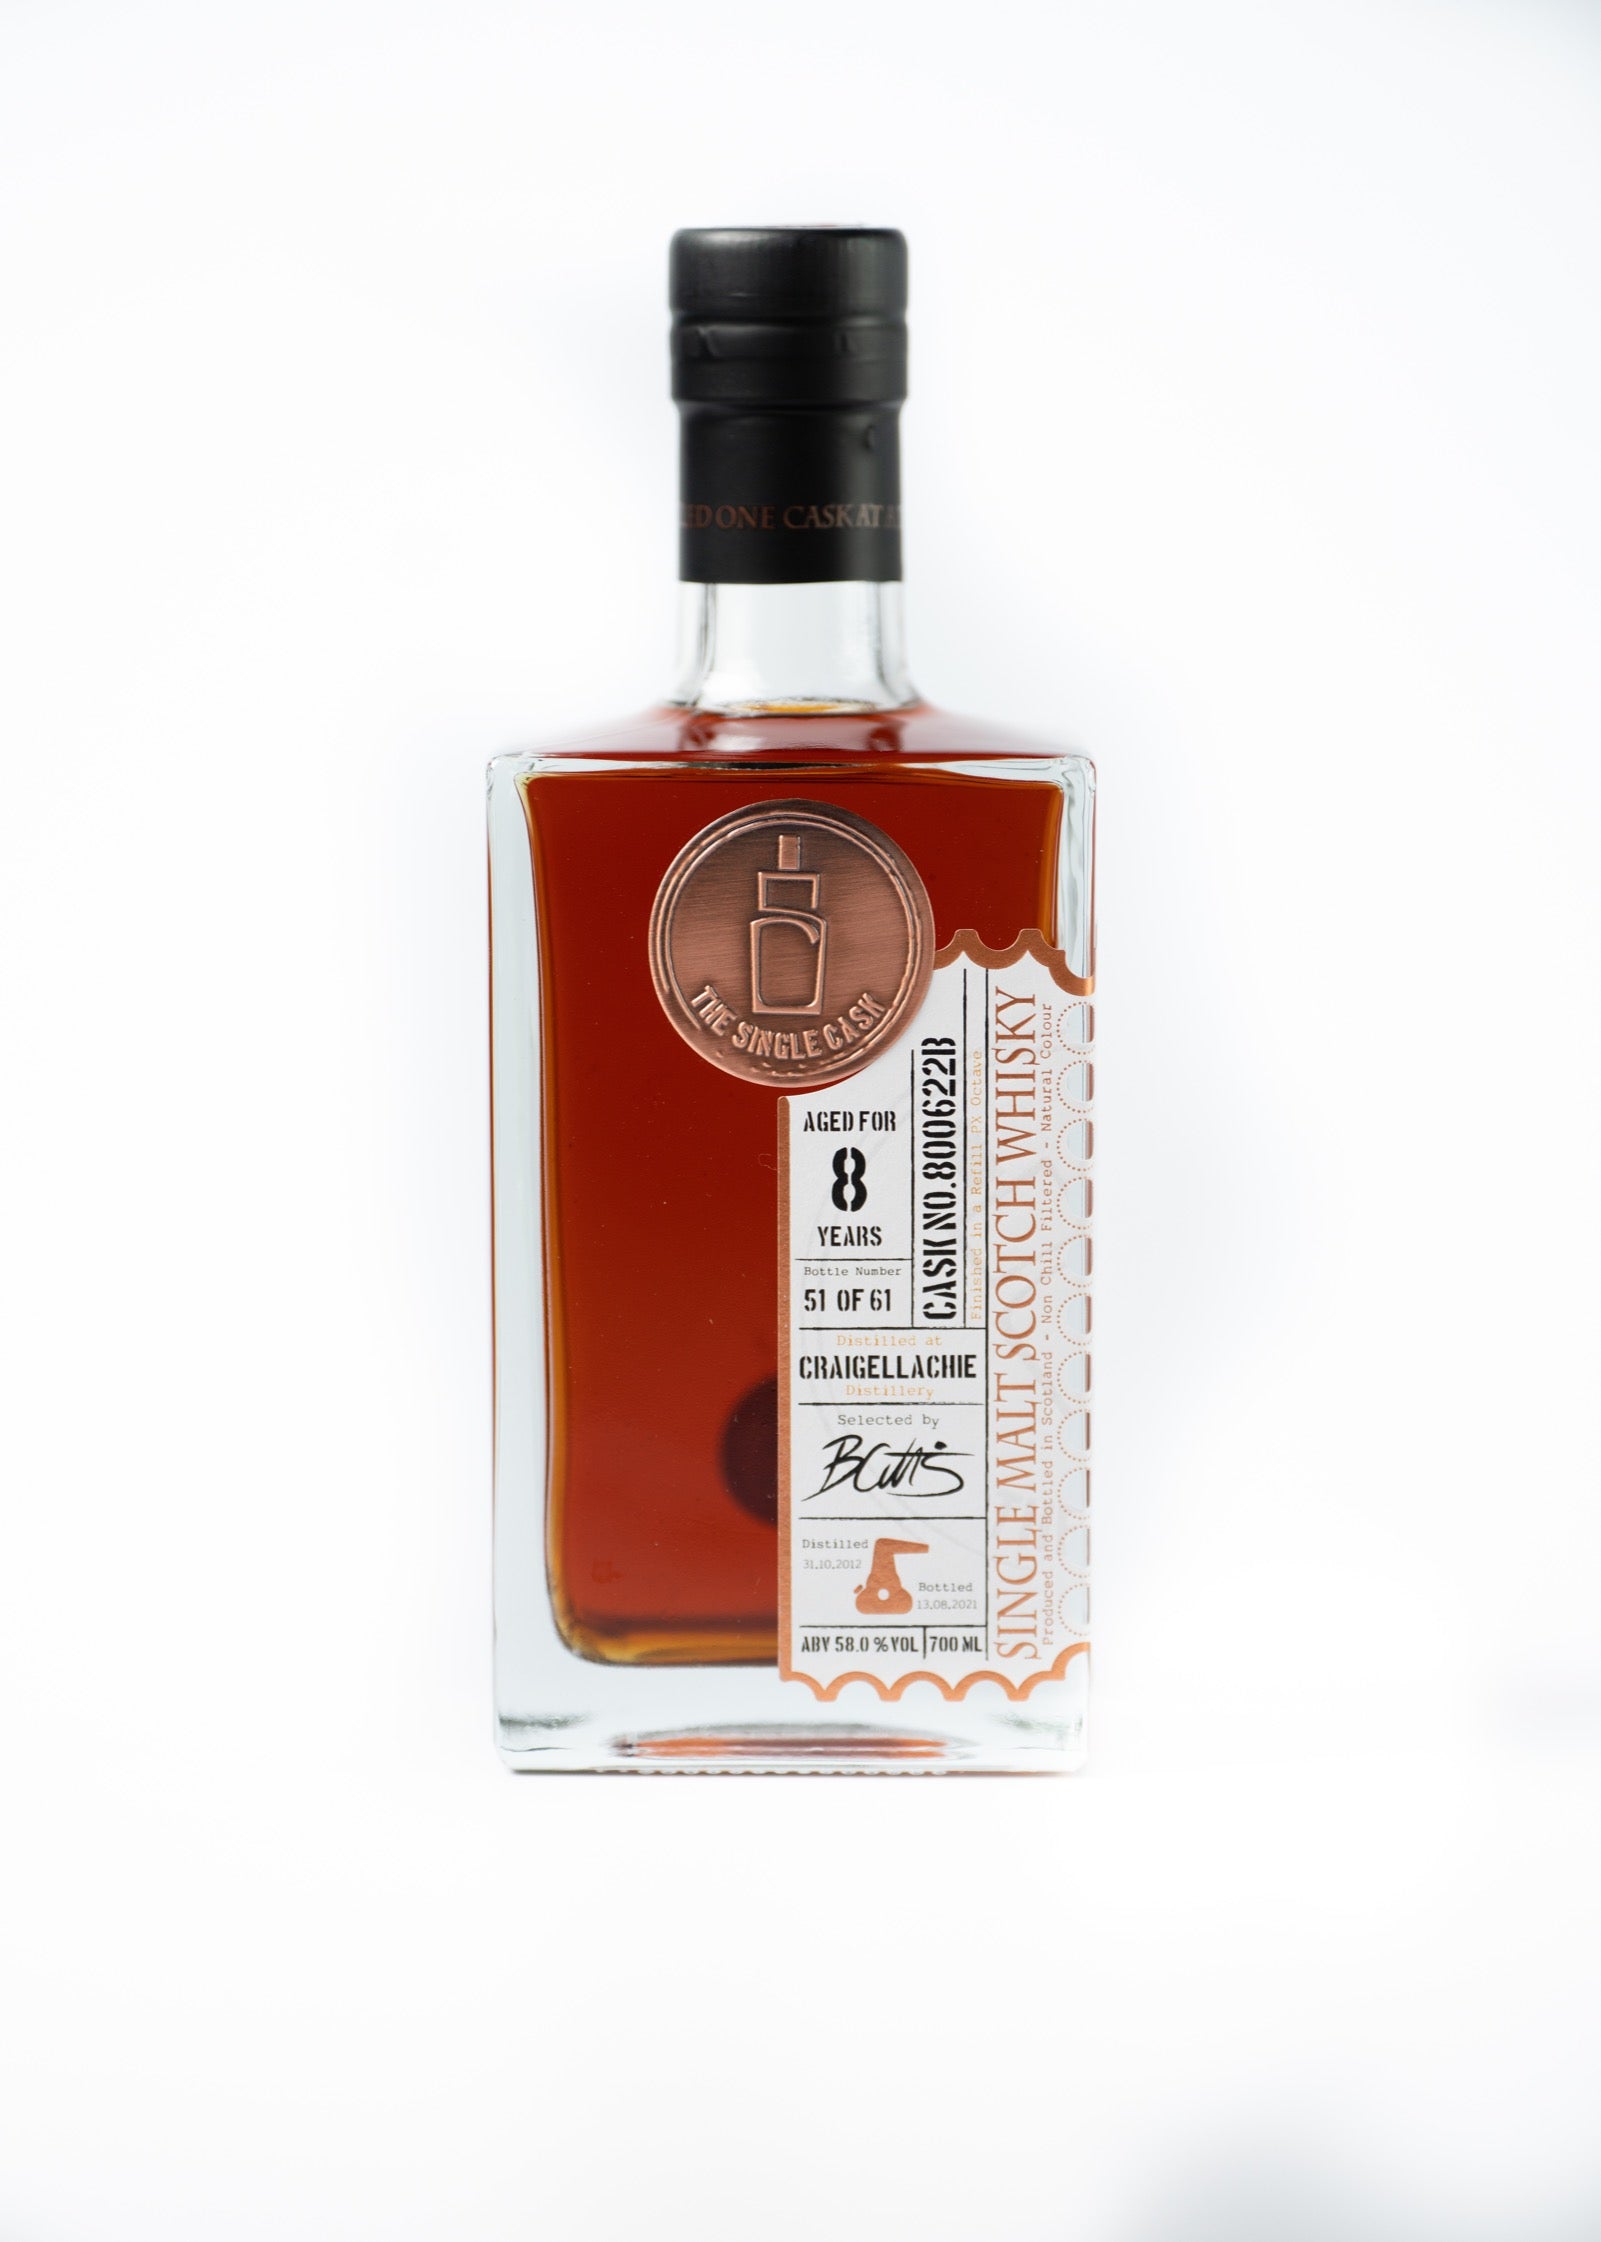 Craigellaiche 8 years old single malt scotch whisky bottled by The Single Cask, Finished in a Refill PX Octave